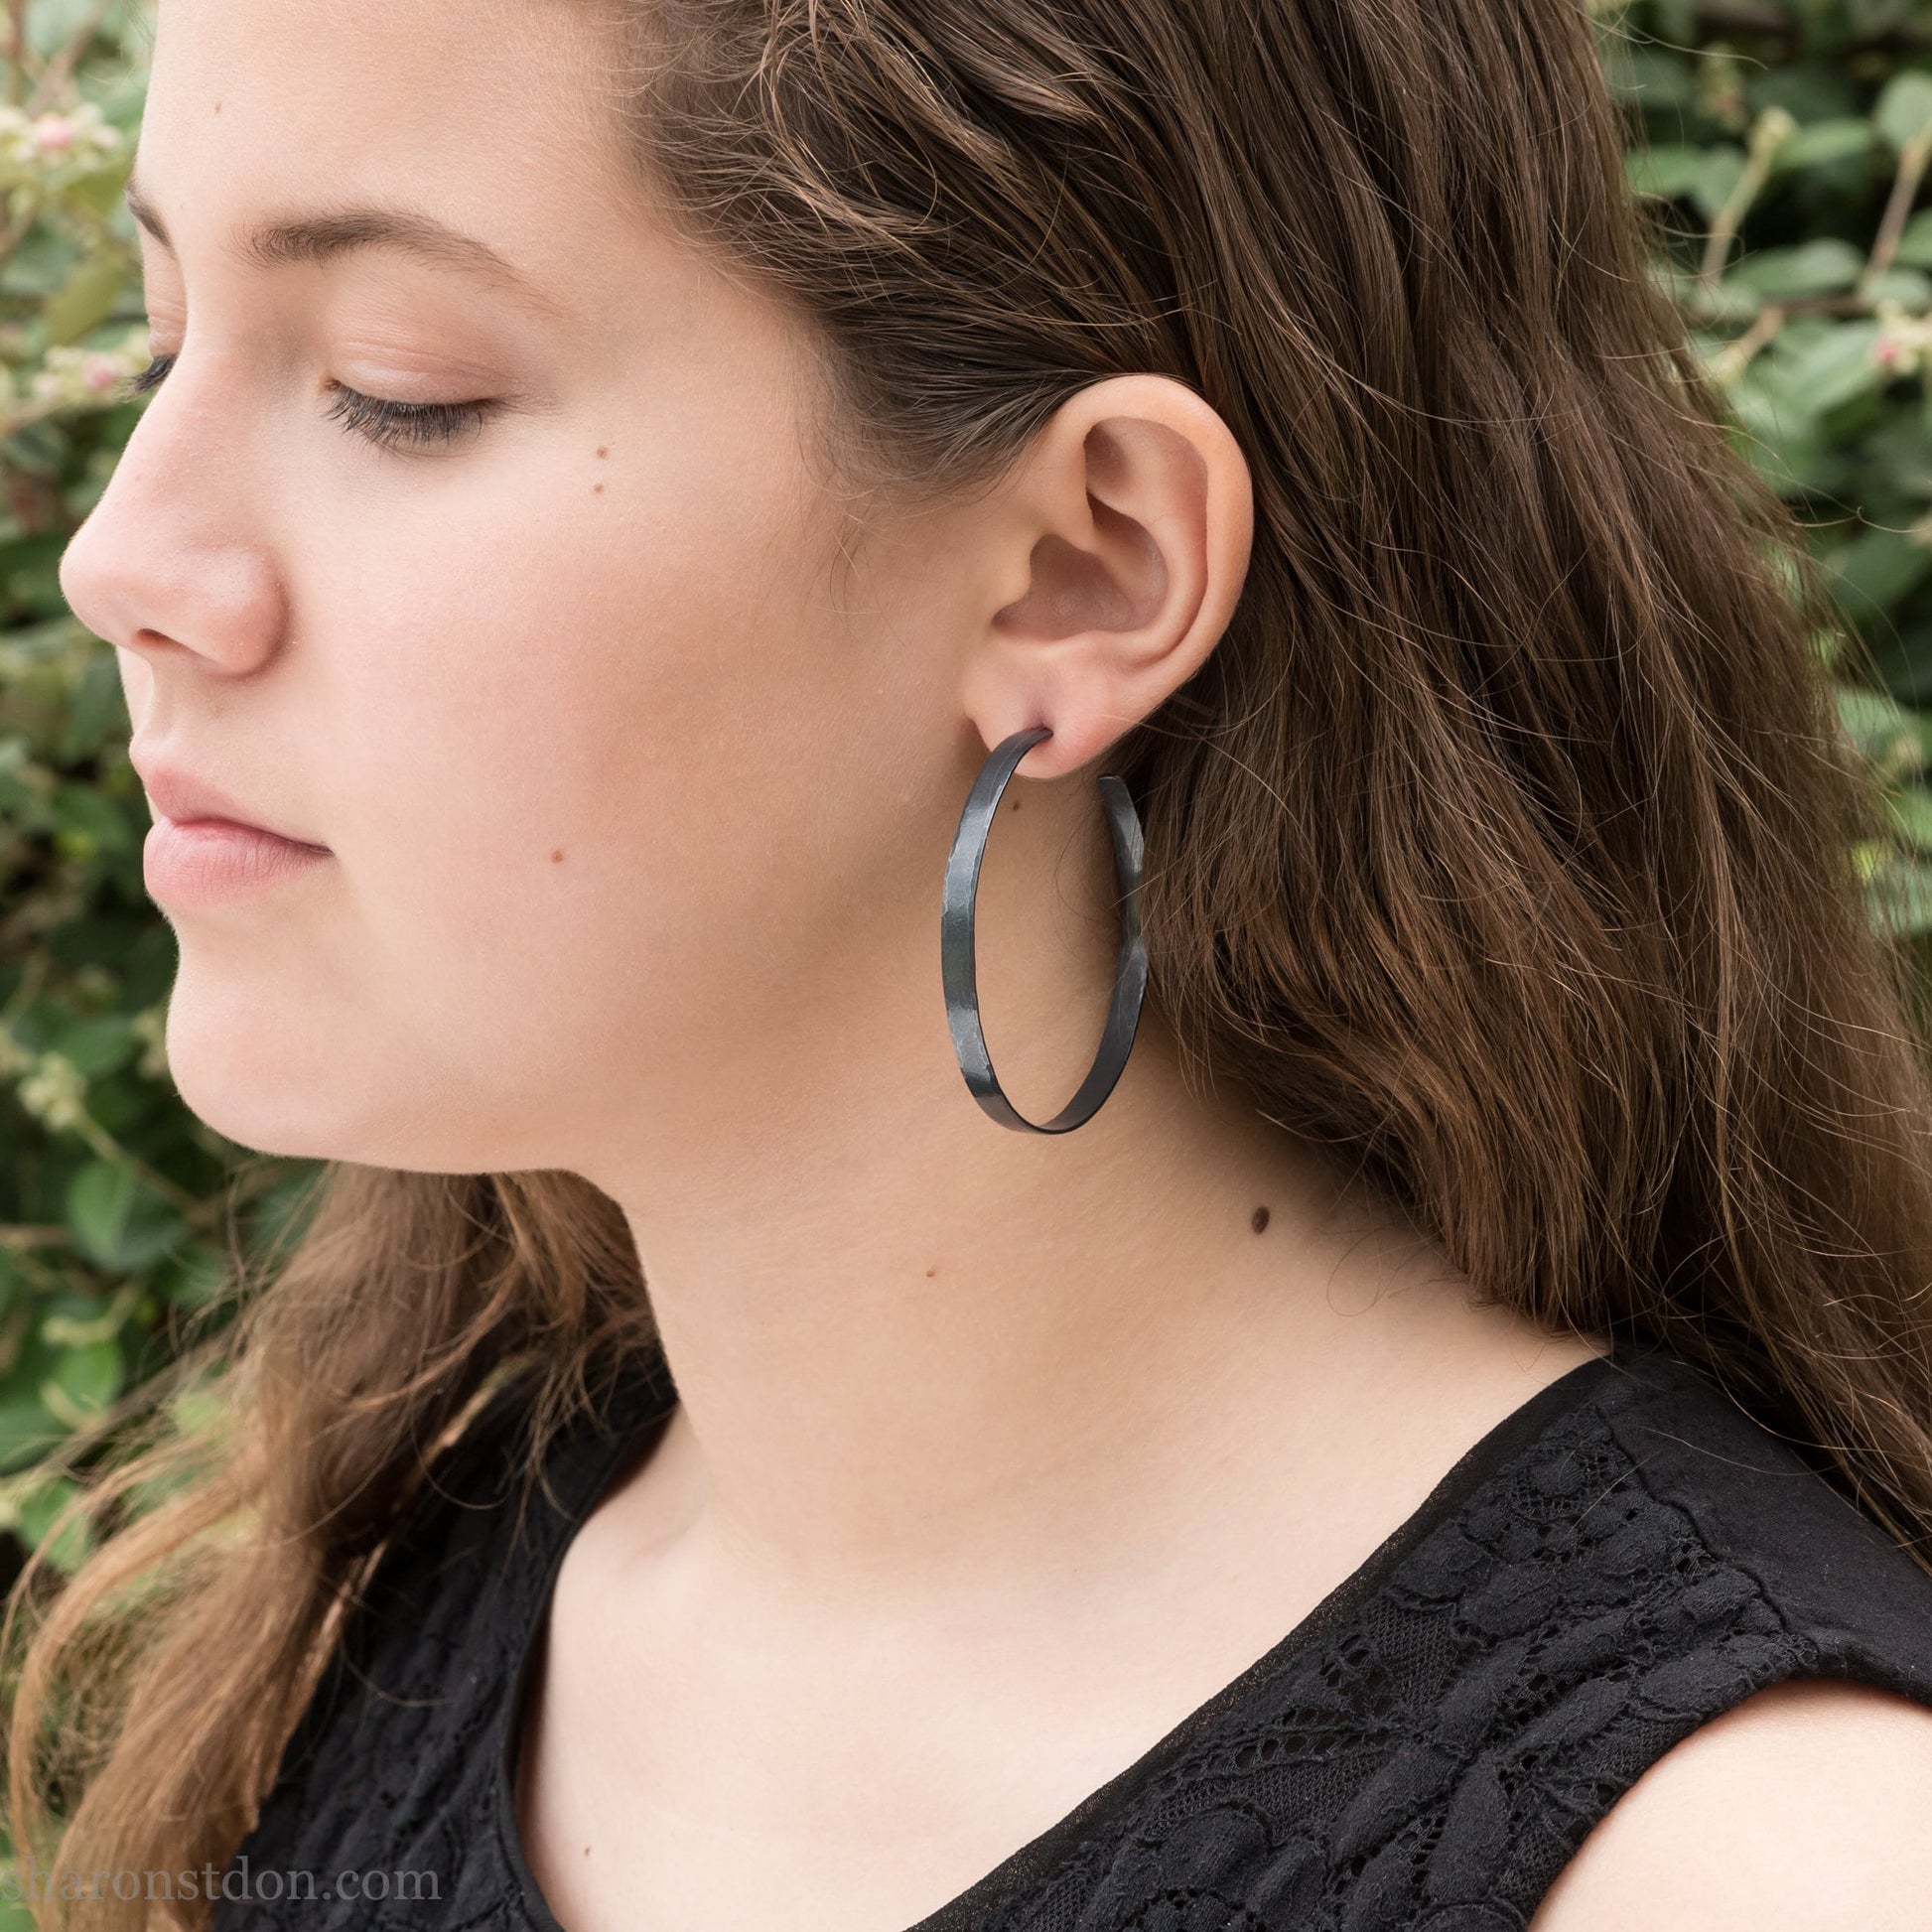 Handmade 925 sterling silver hoop earrings for women. 55mm diameter, 5mm wide, Oxidized black, large hoops for daily wear. Minimalist, comfortable, lightweight with a hammered, texture.